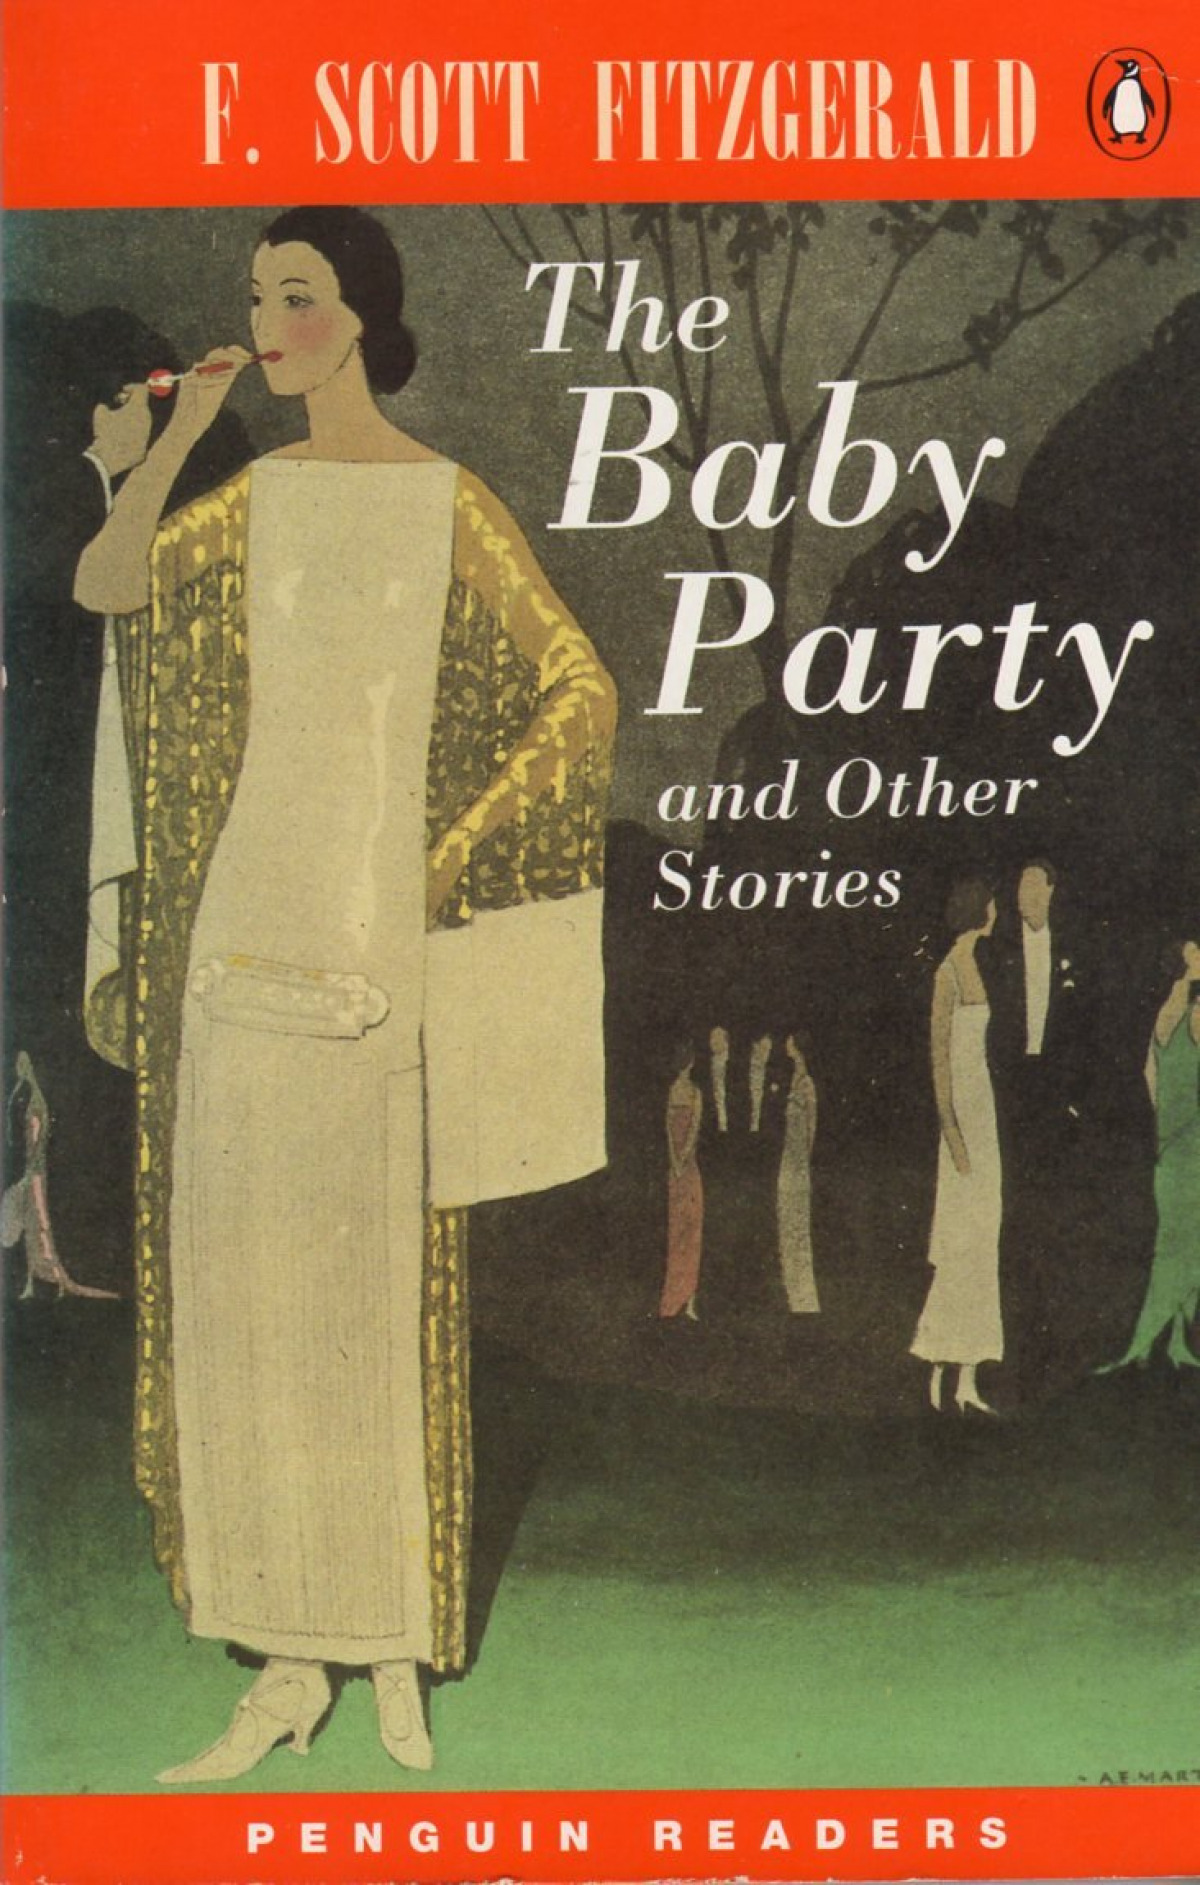 The baby party and other stories - Scott Fitzgerald, F.